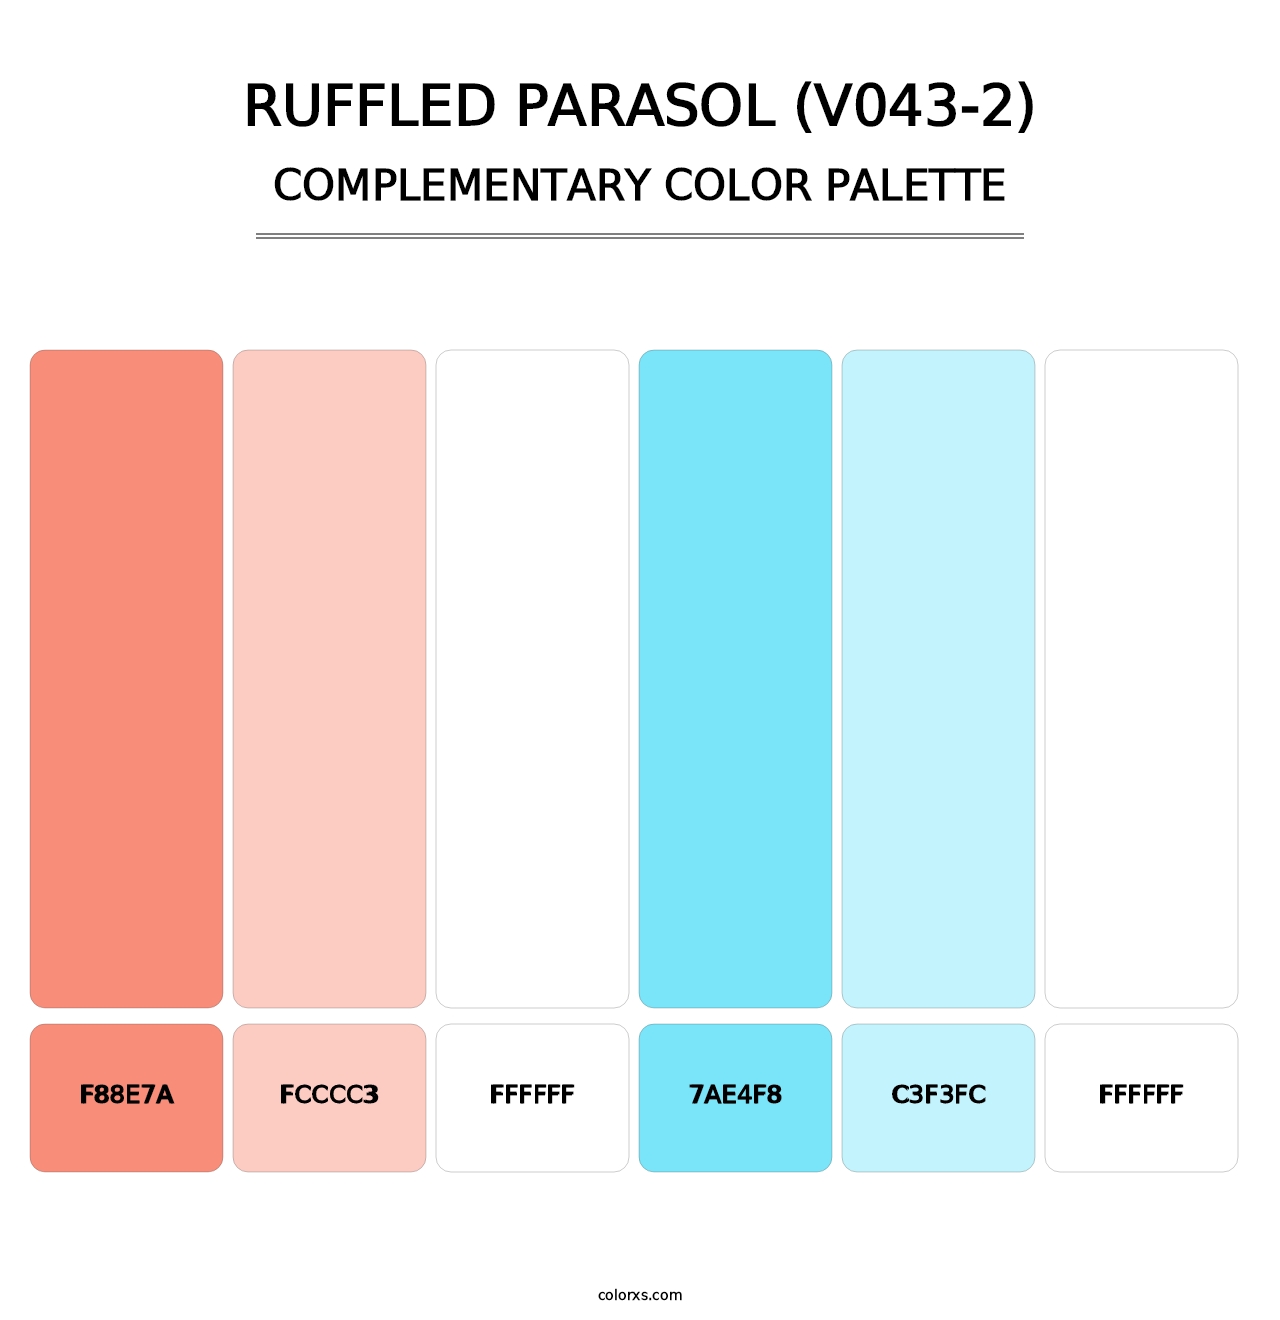 Ruffled Parasol (V043-2) - Complementary Color Palette